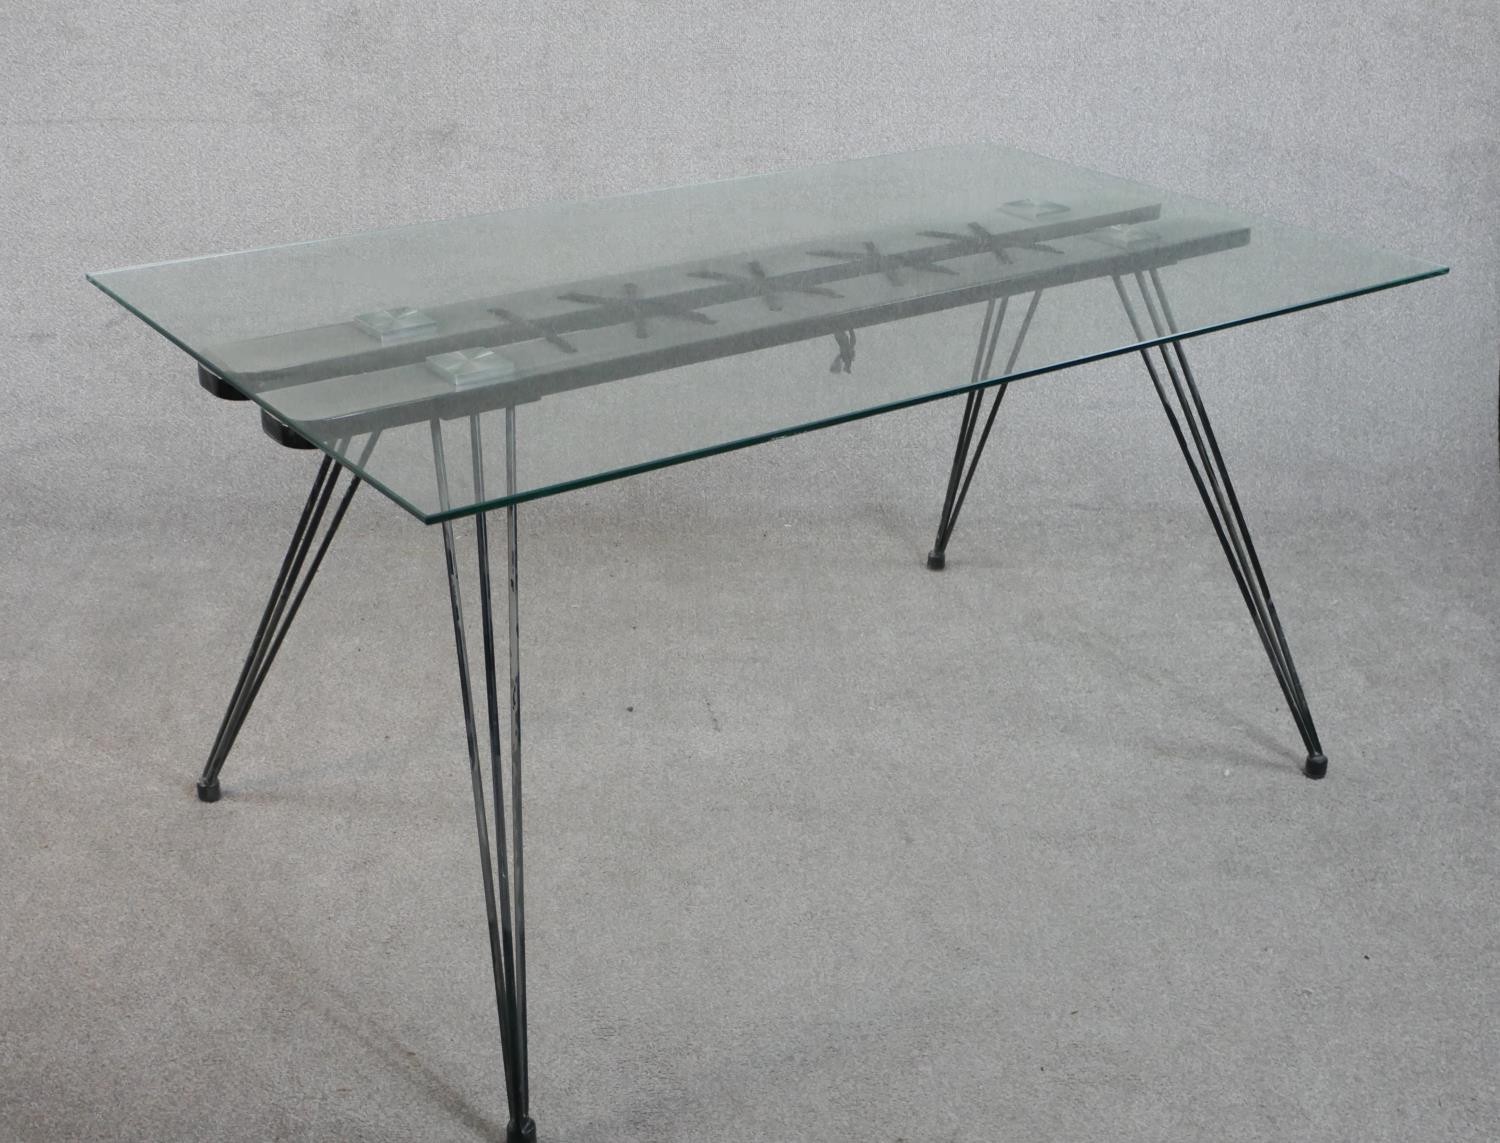 A 20th century dining table, with a rectangular plate glass top, the base woven together with rope - Image 5 of 5